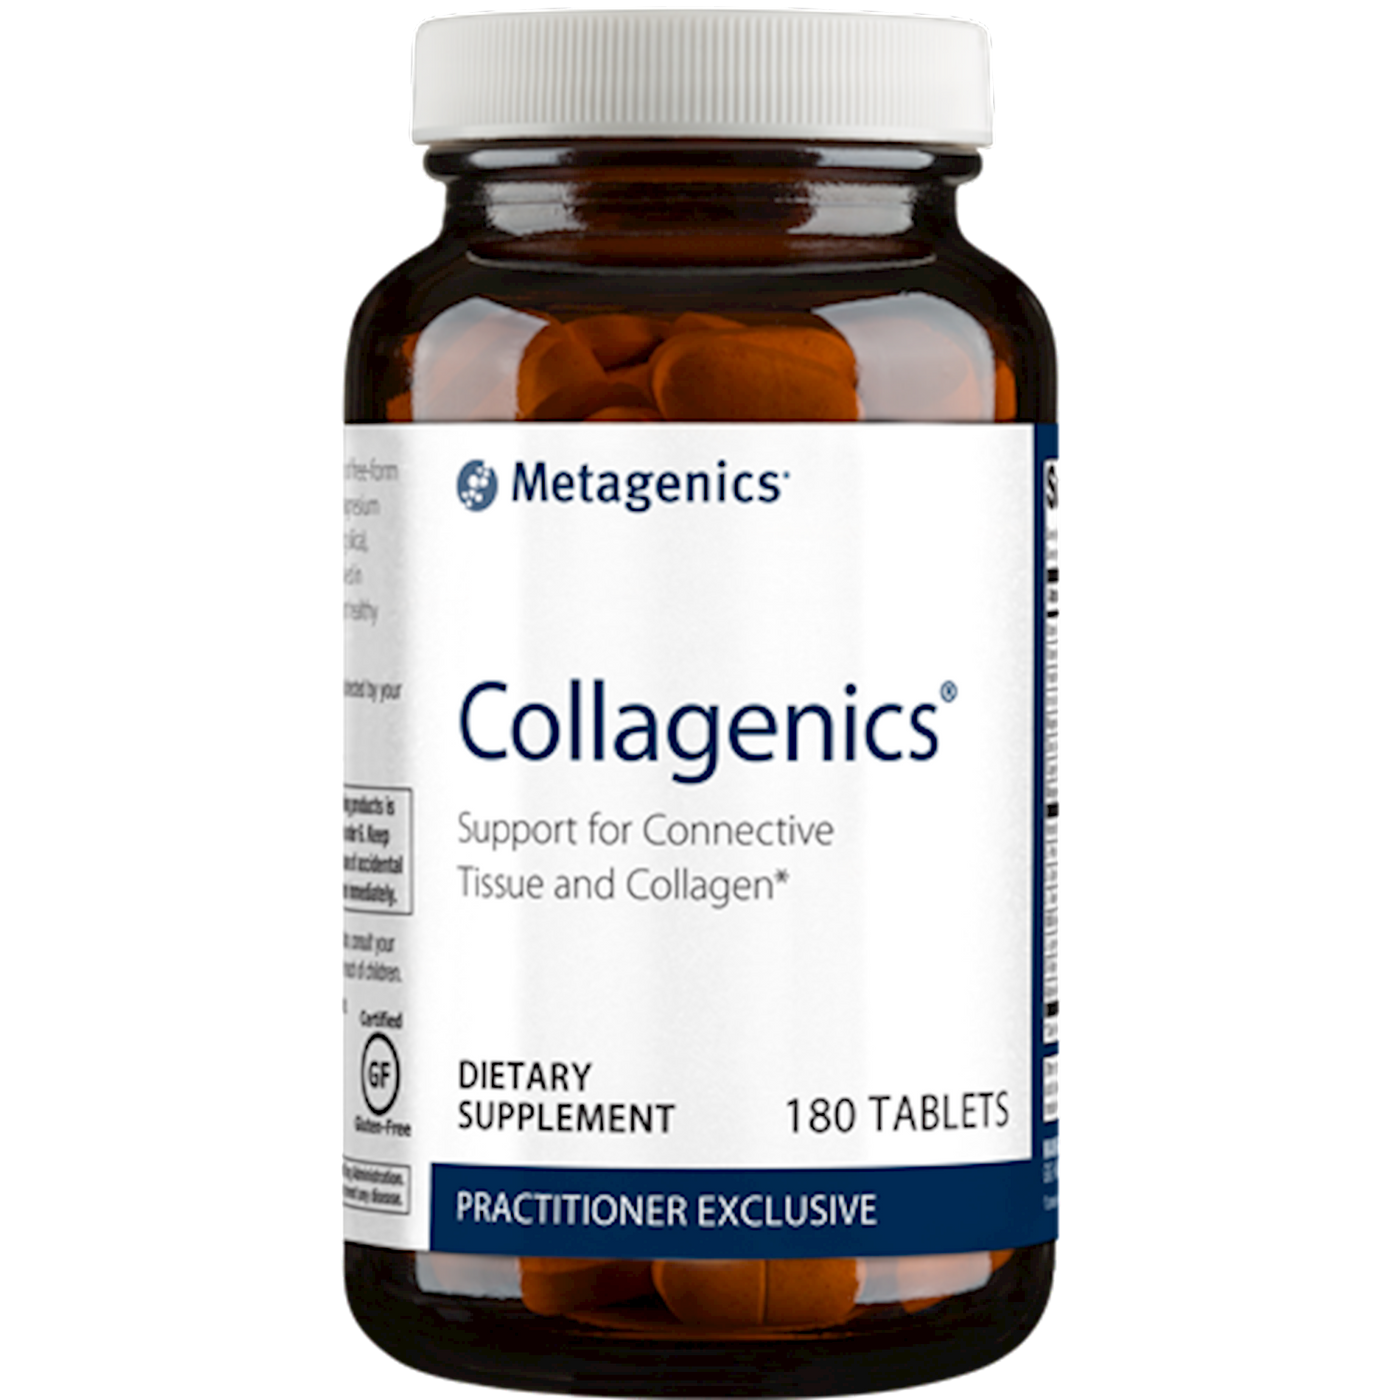 Collagenics  Curated Wellness